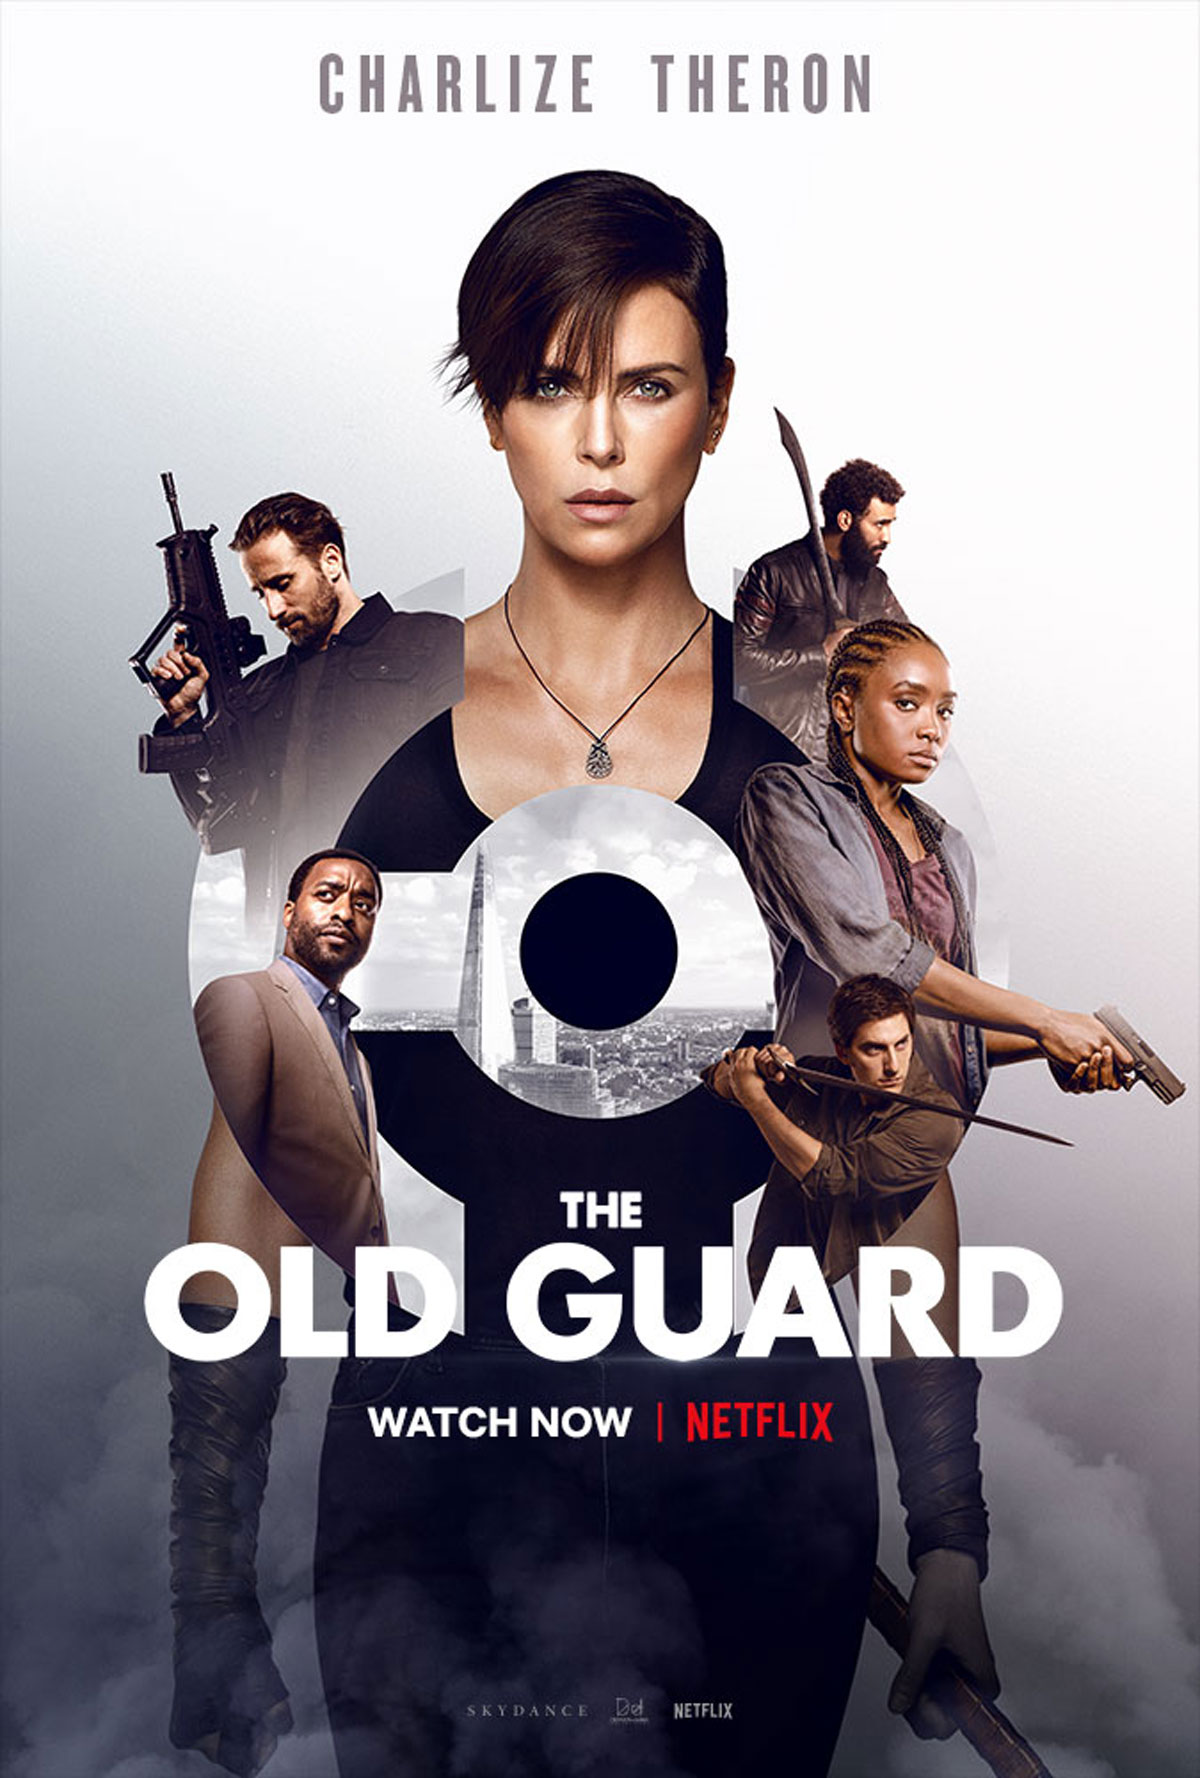 The Old Guard movie